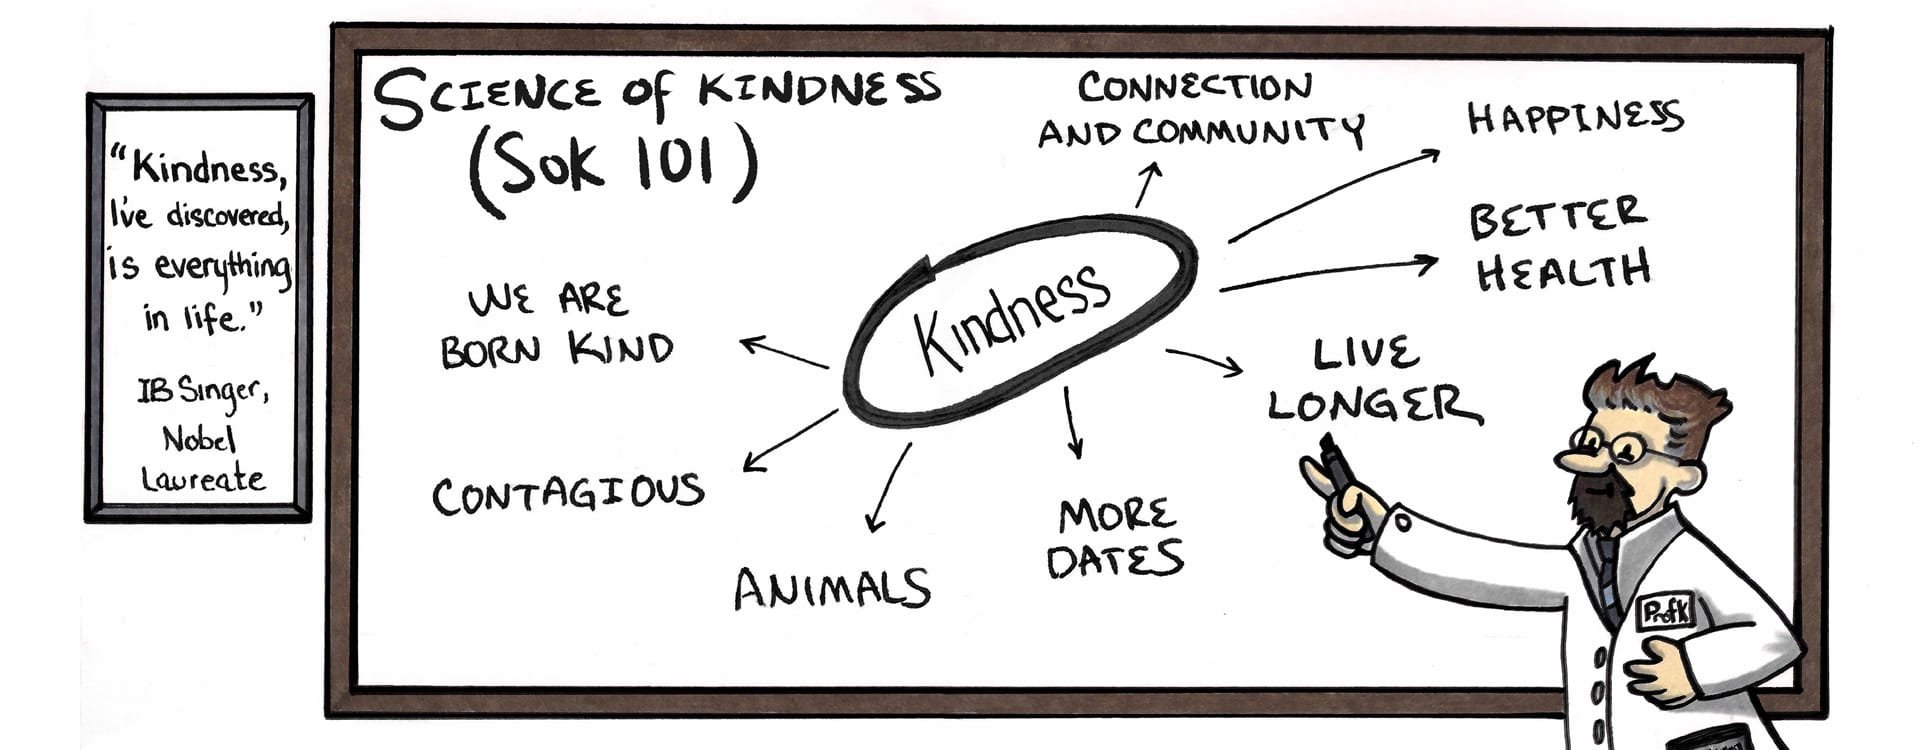 WELCOME TO SCIENCE OF KINDNESS 101